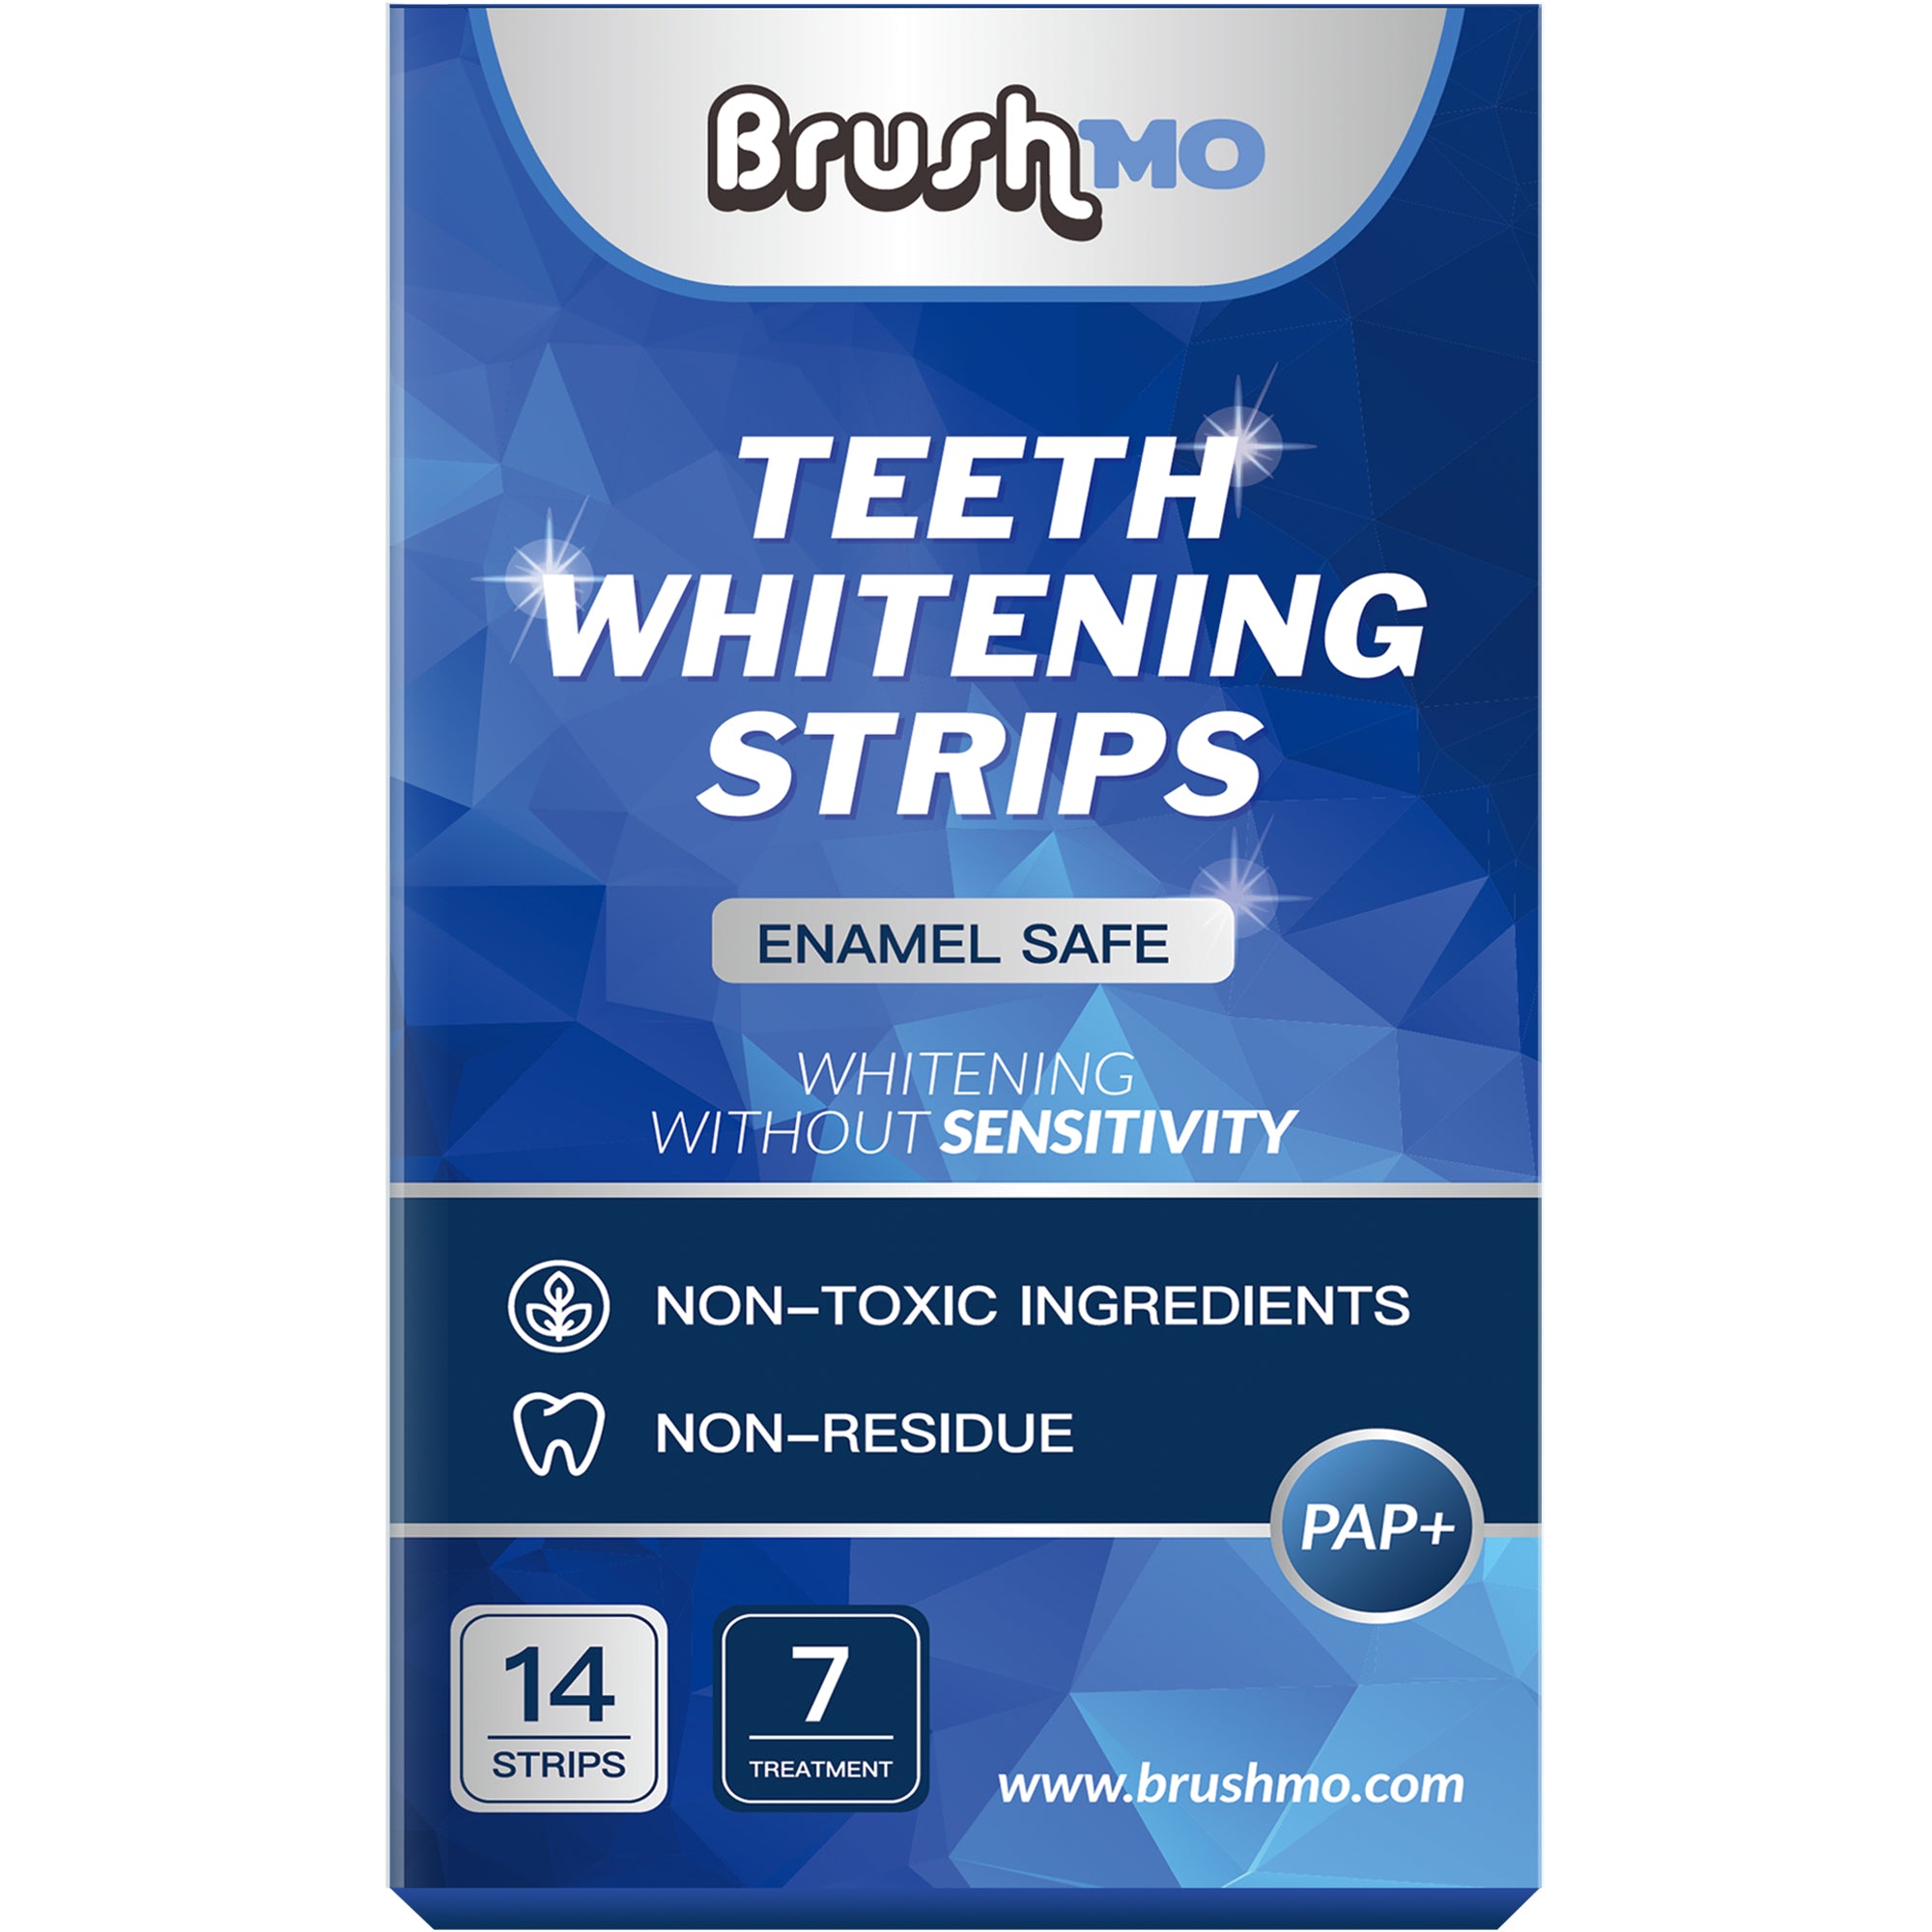 Dentist Formulated PAP+ Teeth Whitening Strips, 7 Treatments (14 Strips)